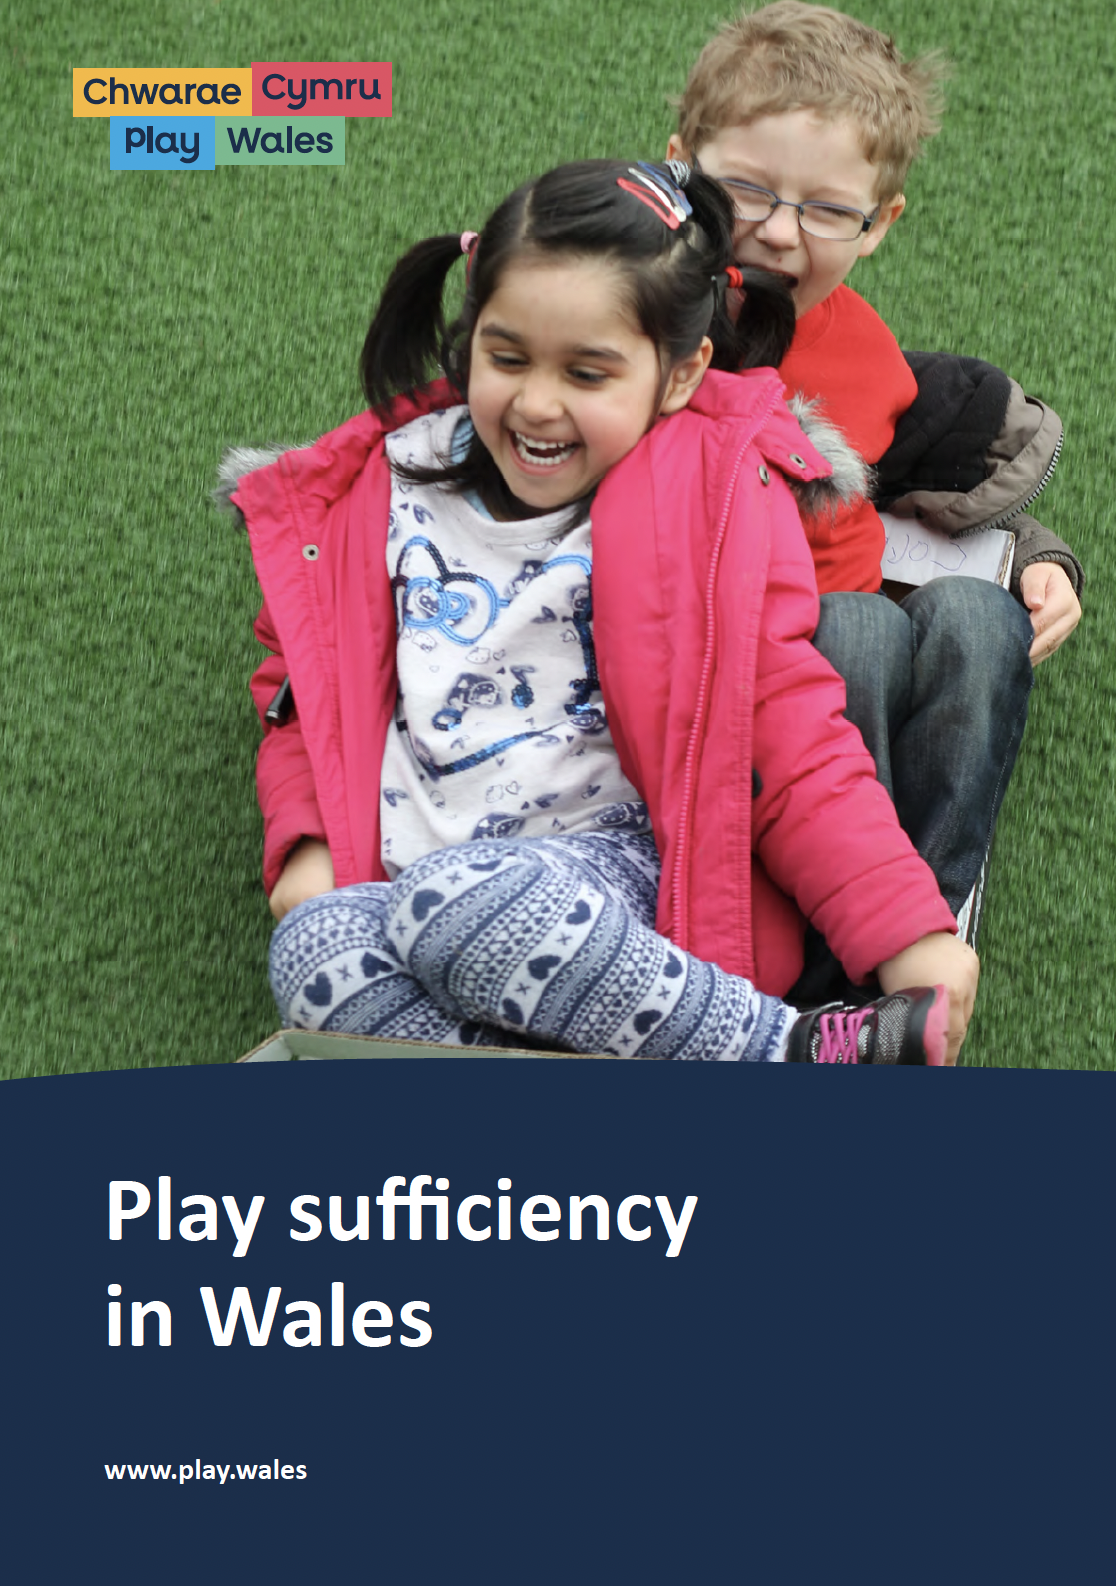 Play sufficiency in Wales